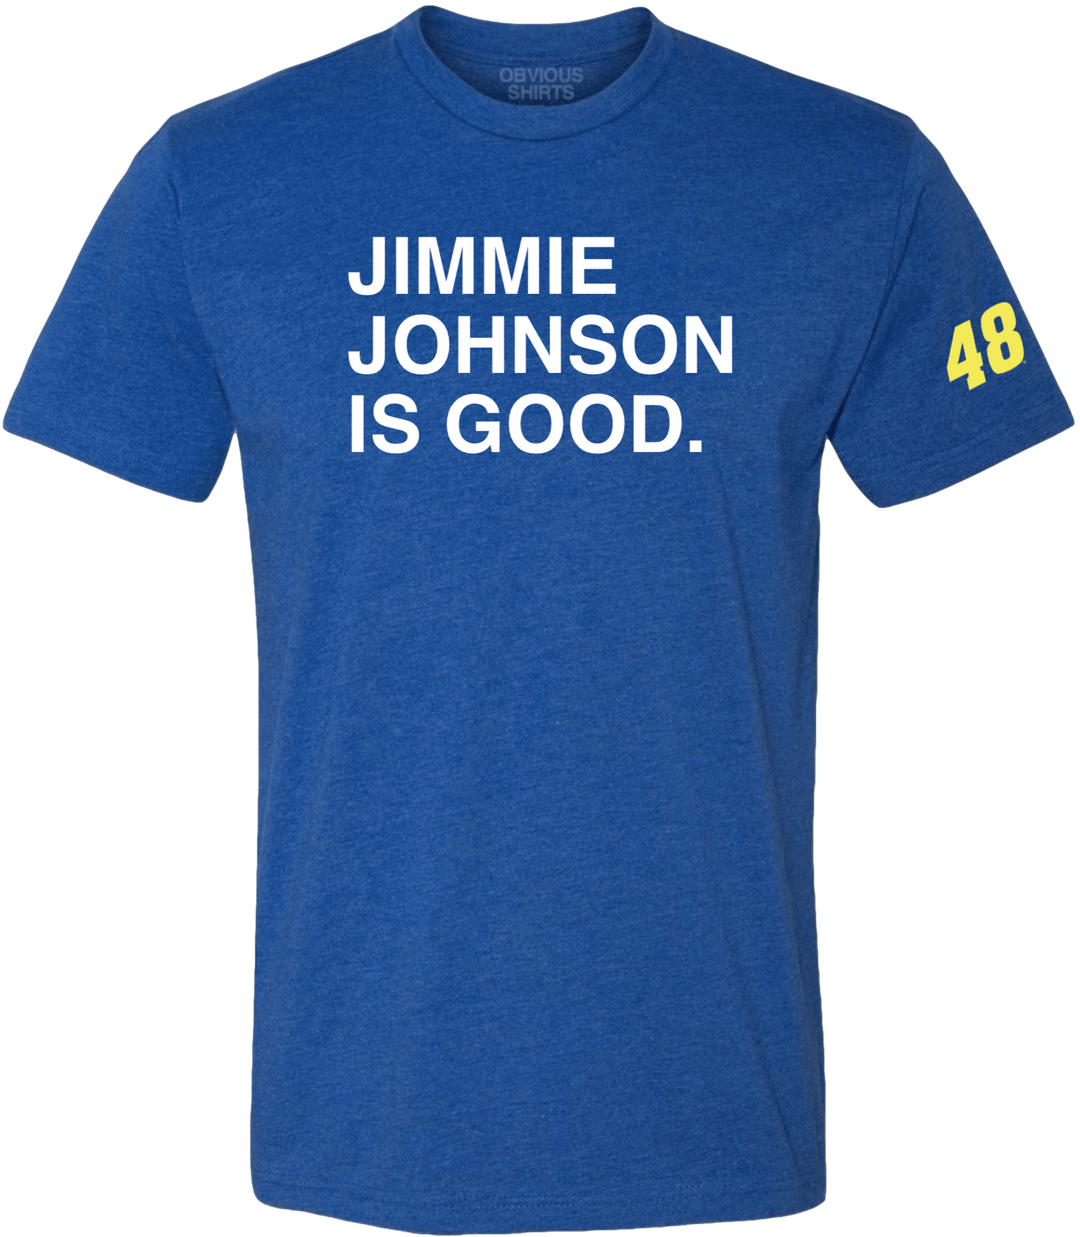 JIMMIE JOHNSON IS GOOD. - OBVIOUS SHIRTS